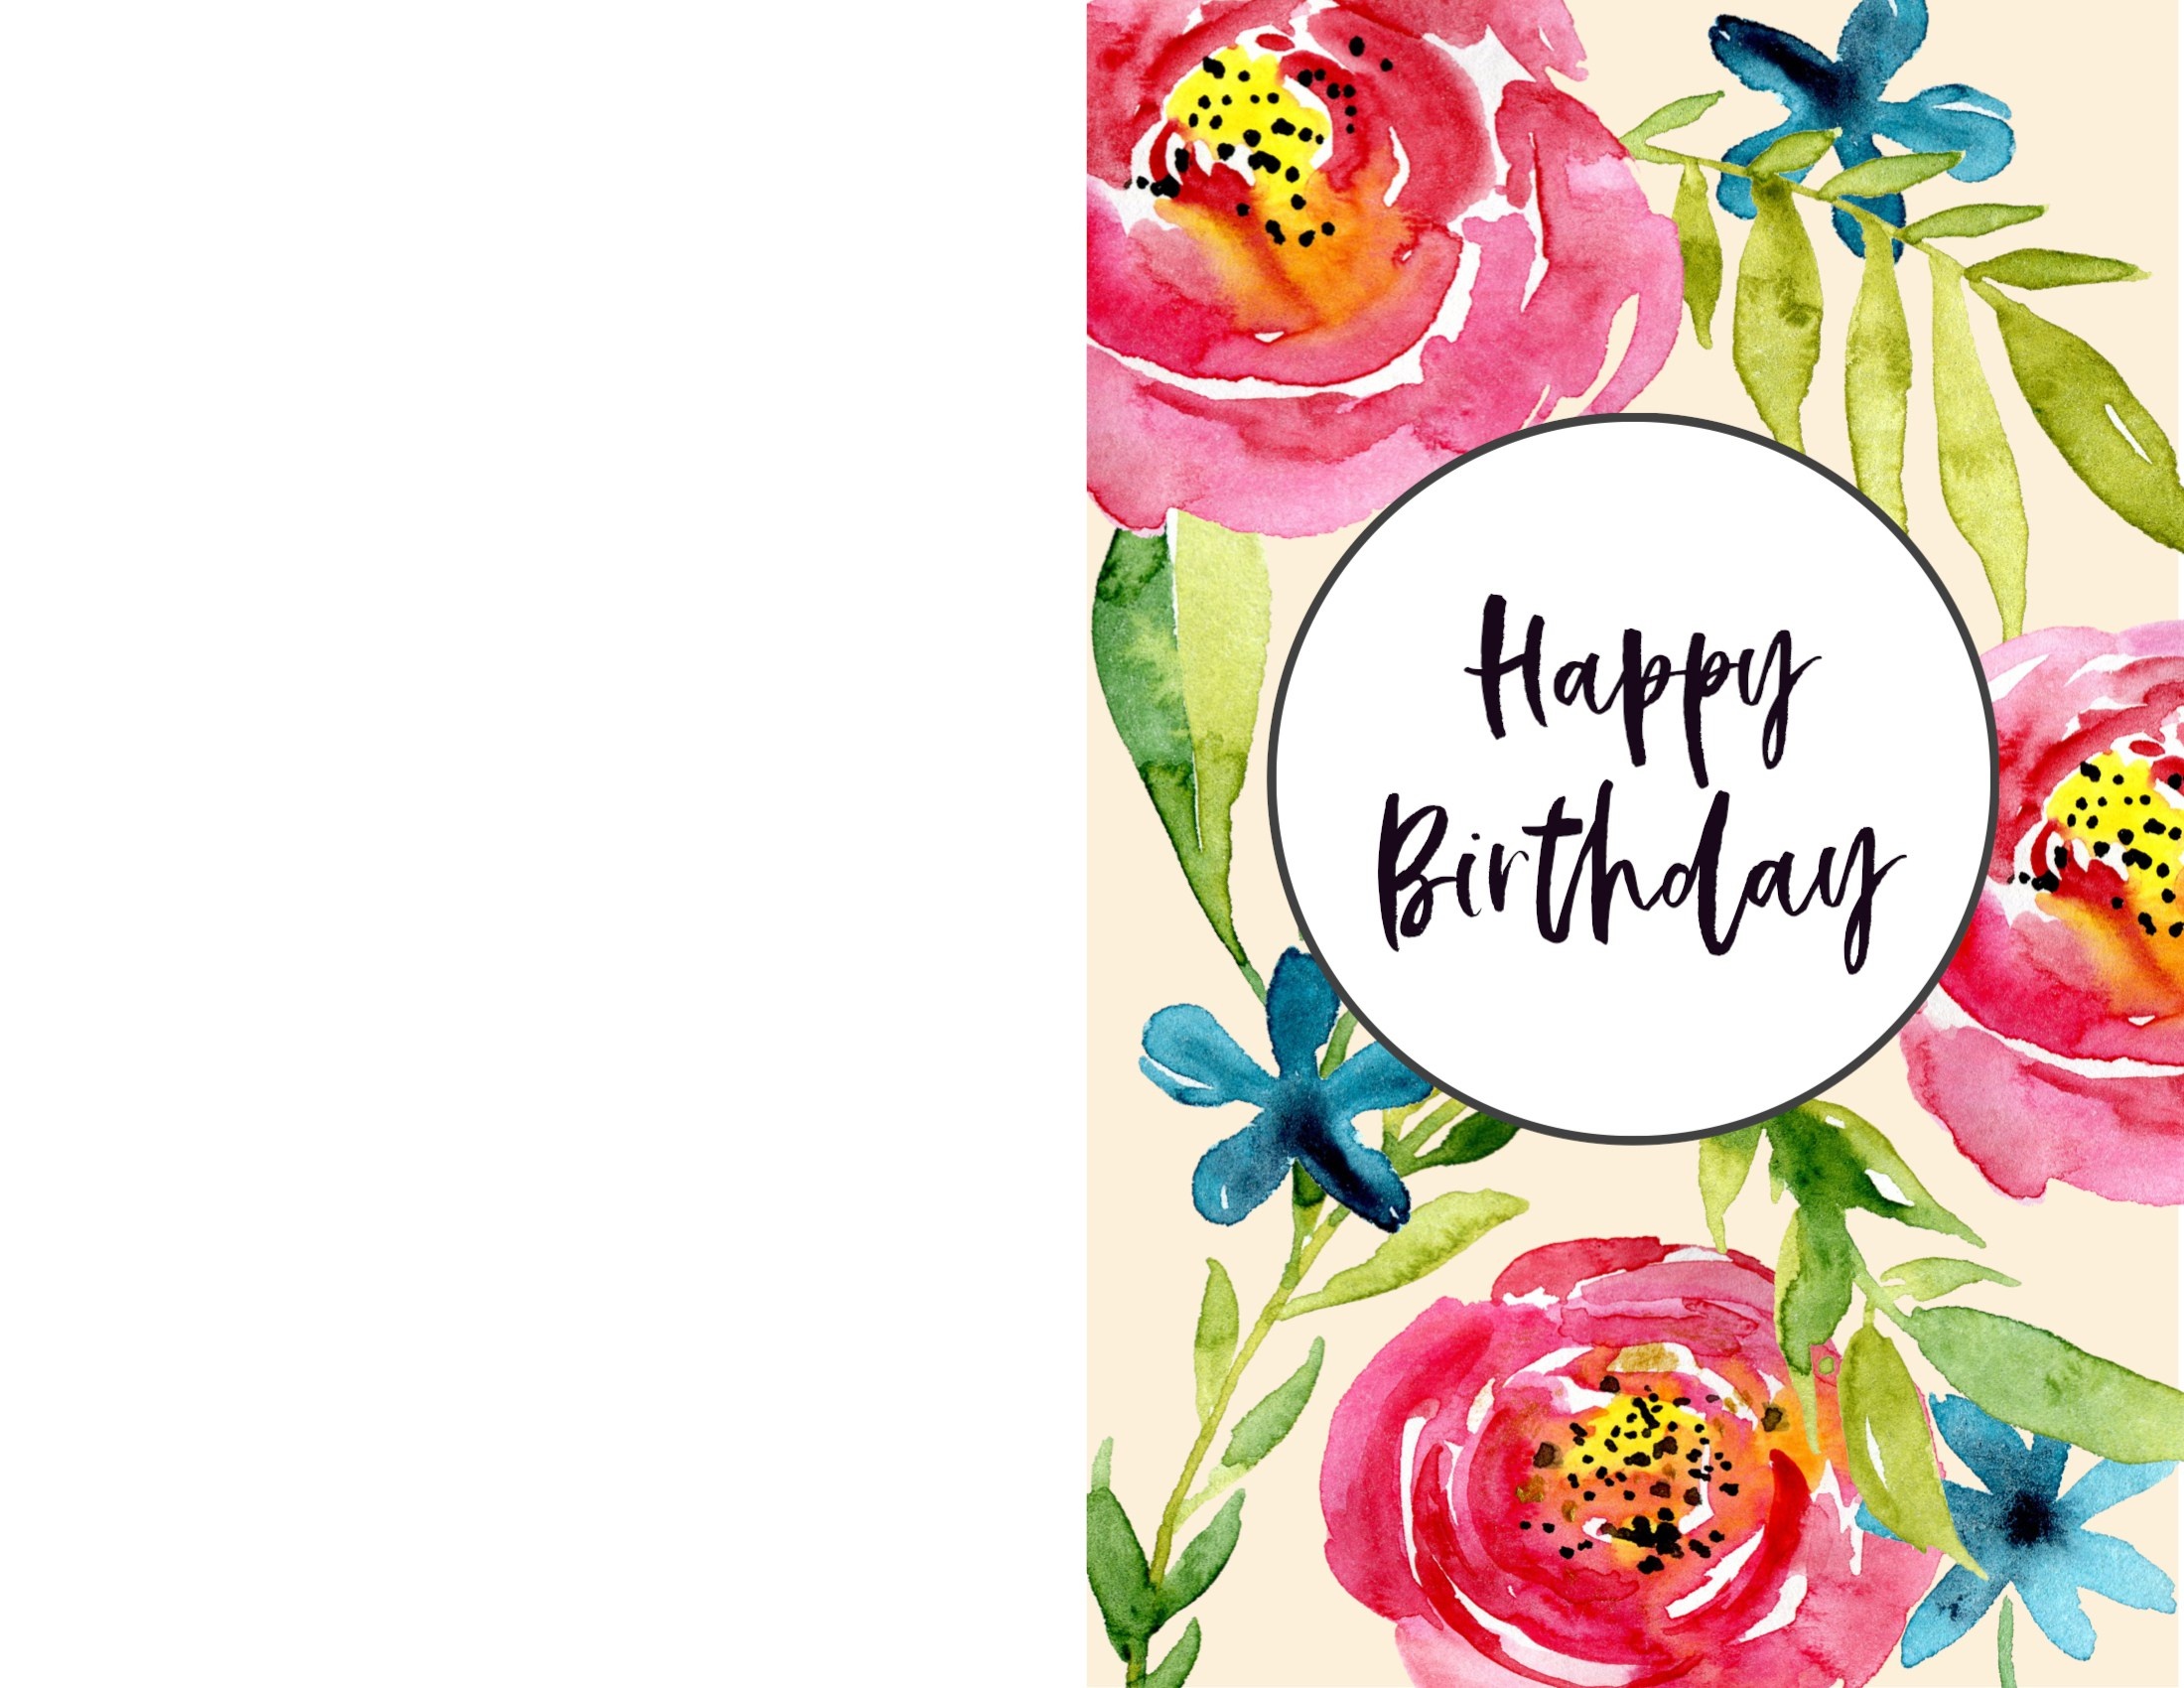 Free Printable Birthday Cards - Paper Trail Design - Free Printable Birthday Cards